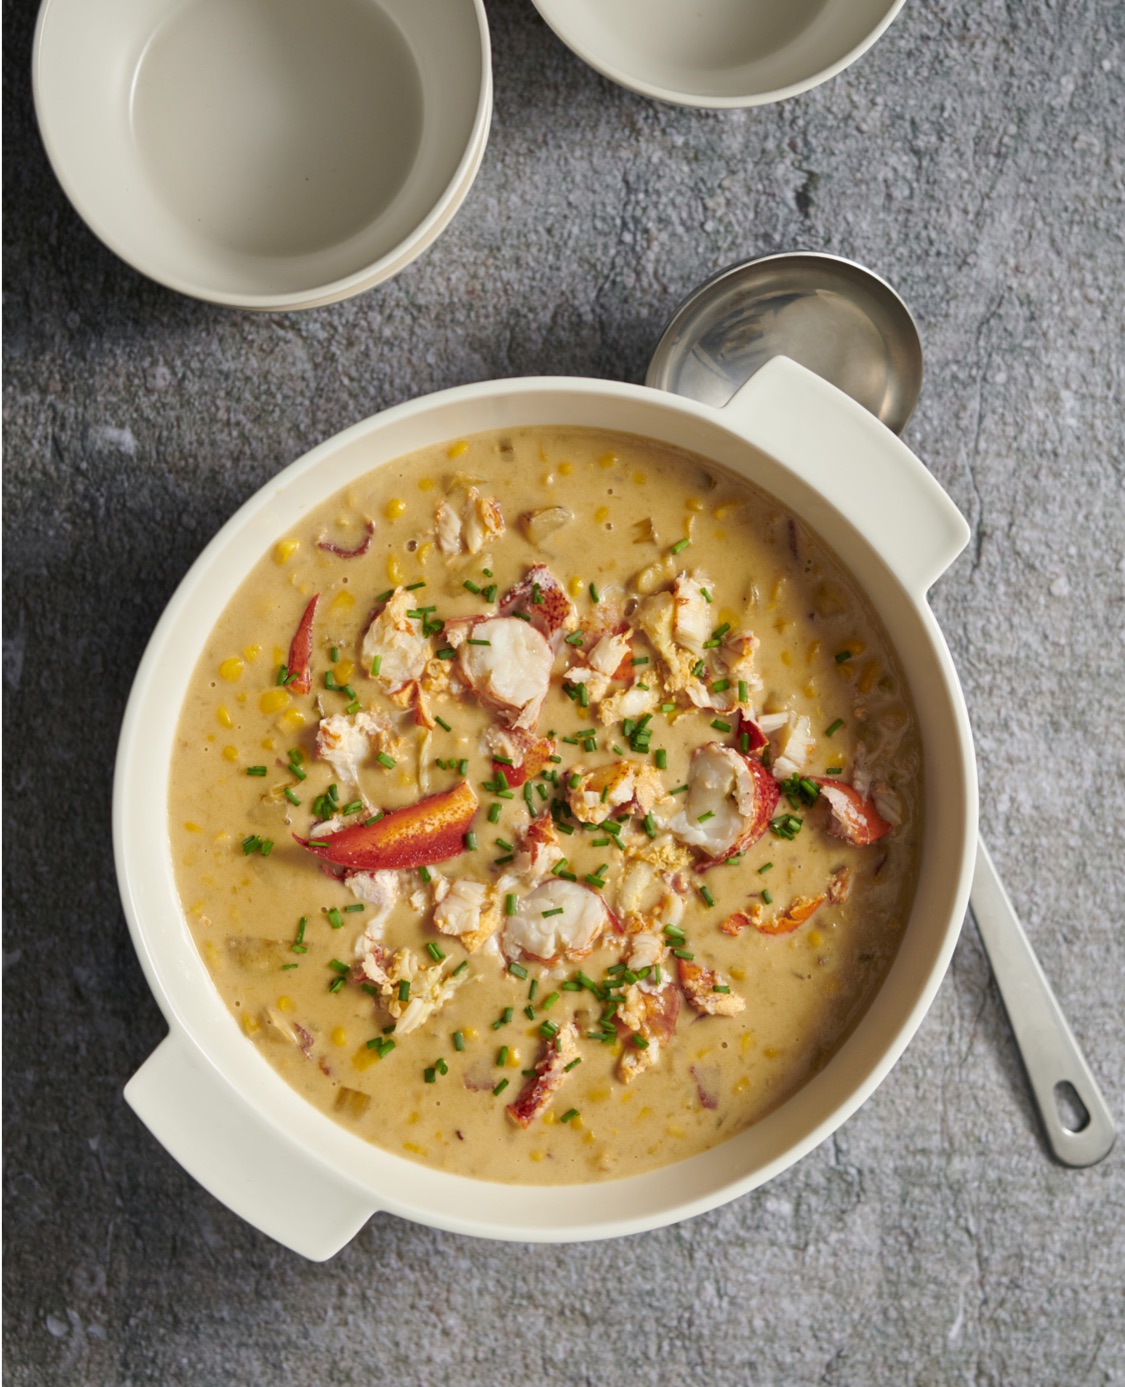 This gluten-free Lobster and Corn Chowder is rich, creamy, and so satisfying that you would never know it’s made in the Instant Pot in under 45 minutes!